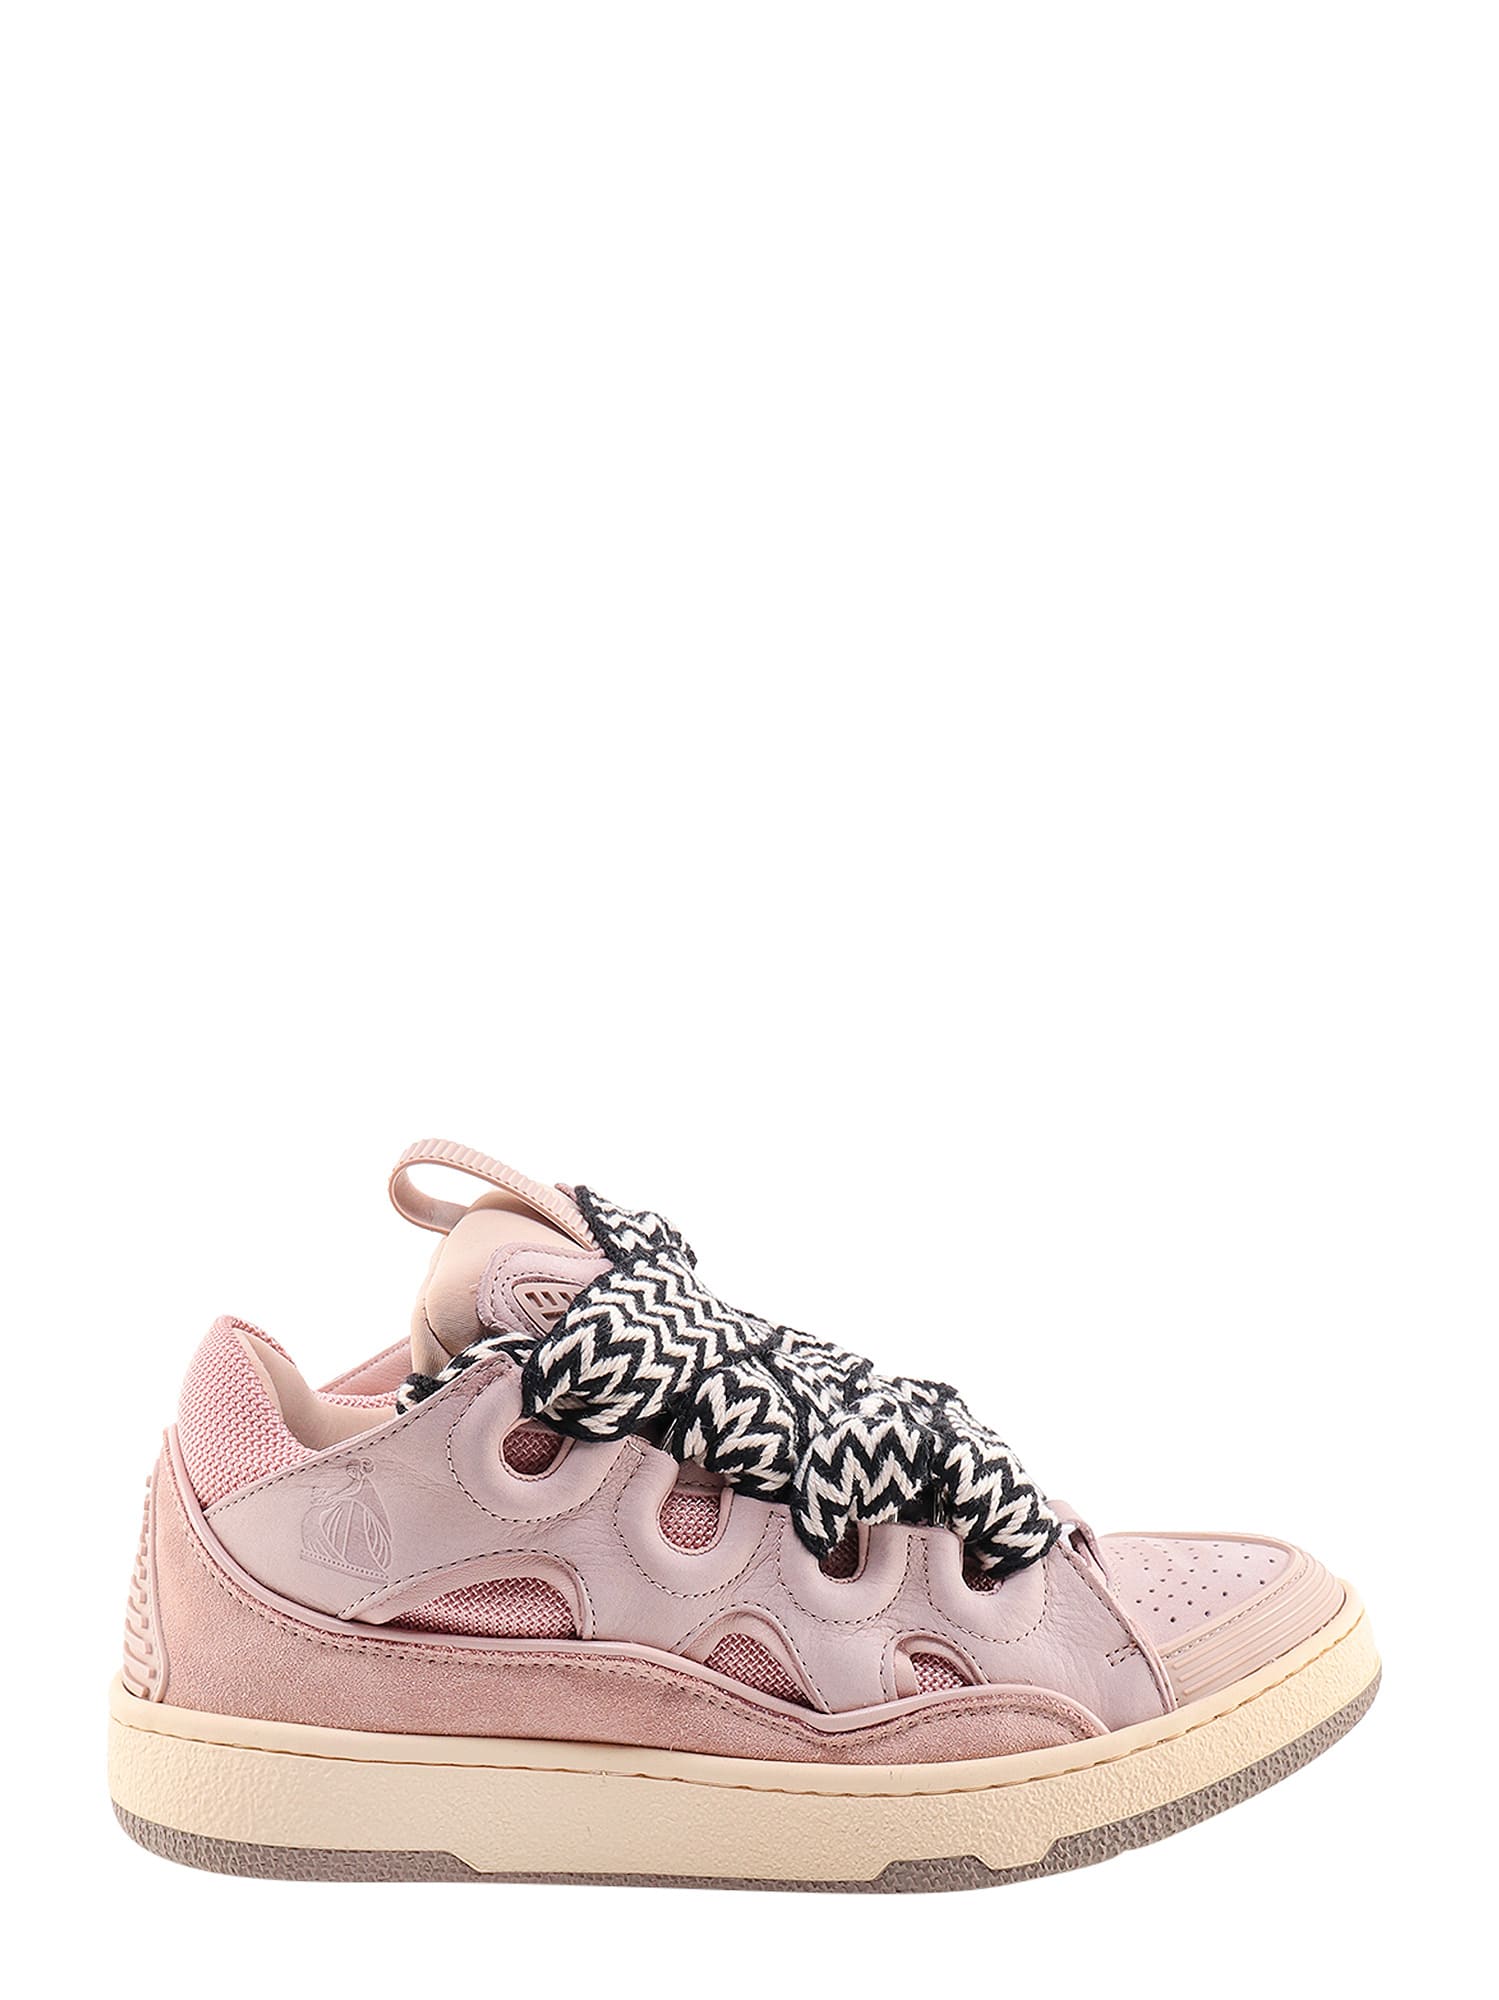 Lanvin Curb Leather Low-top Sneakers In Pale Pink | ModeSens